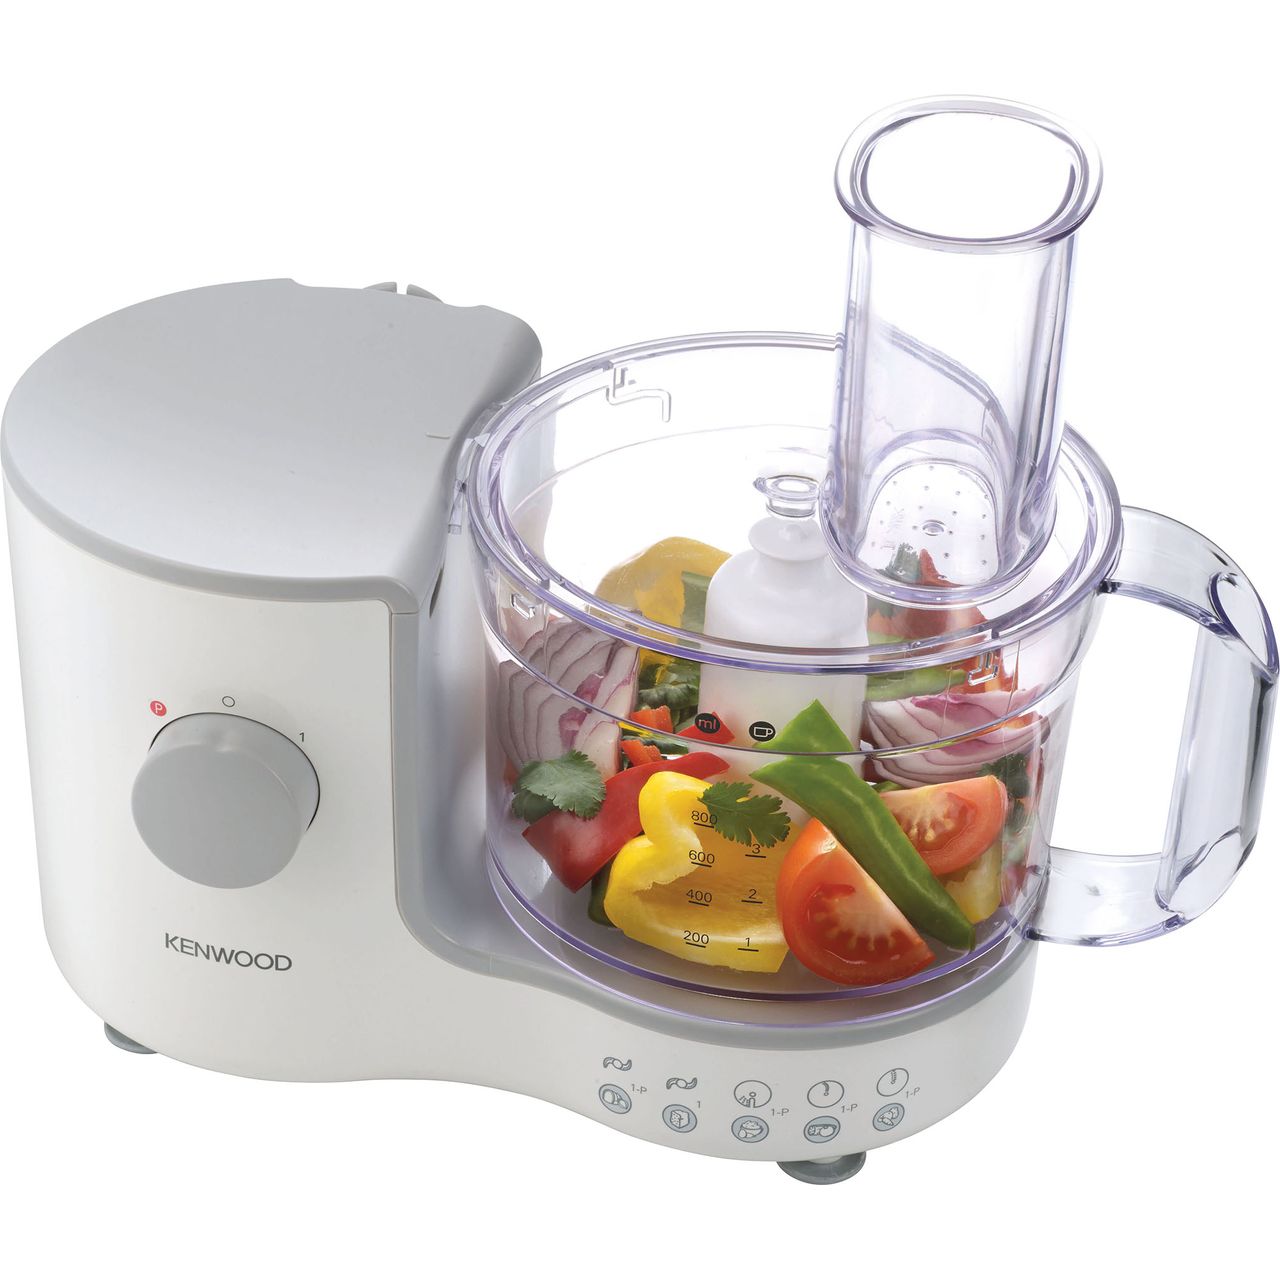 Kenwood FP120A Food Processor With 6 Accessories Review